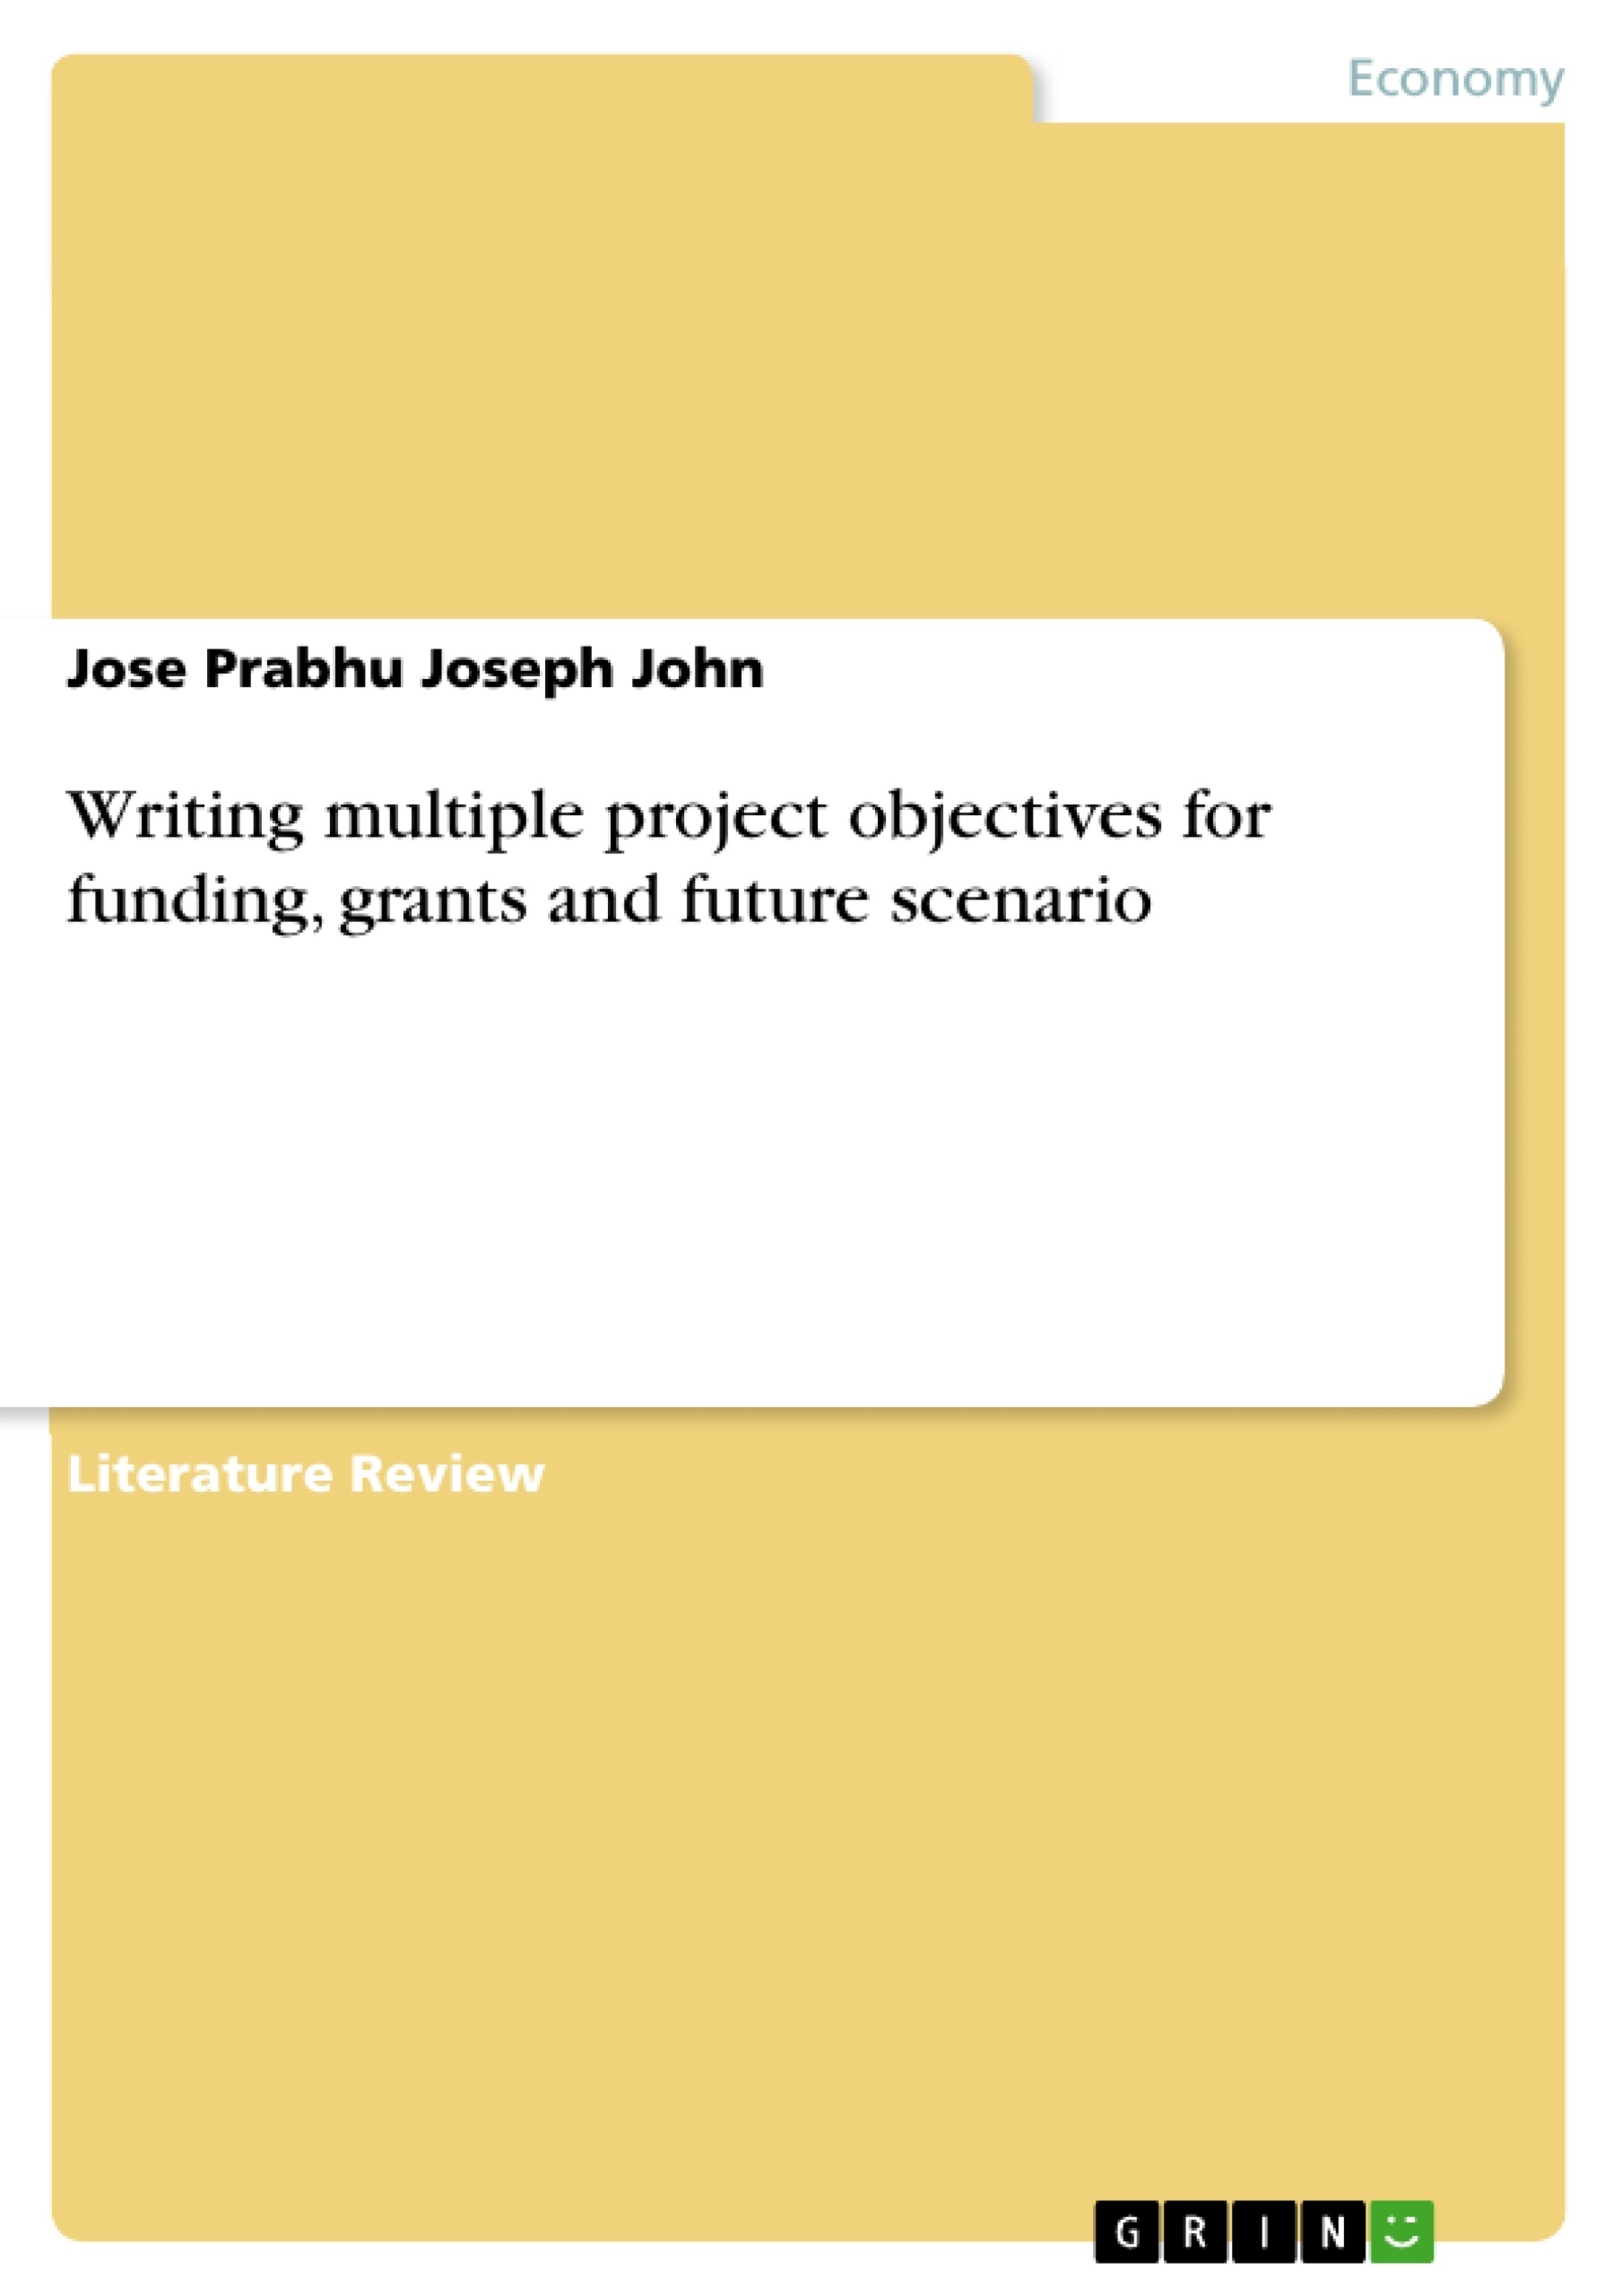 Titre: Writing multiple project objectives for funding, grants and future scenario